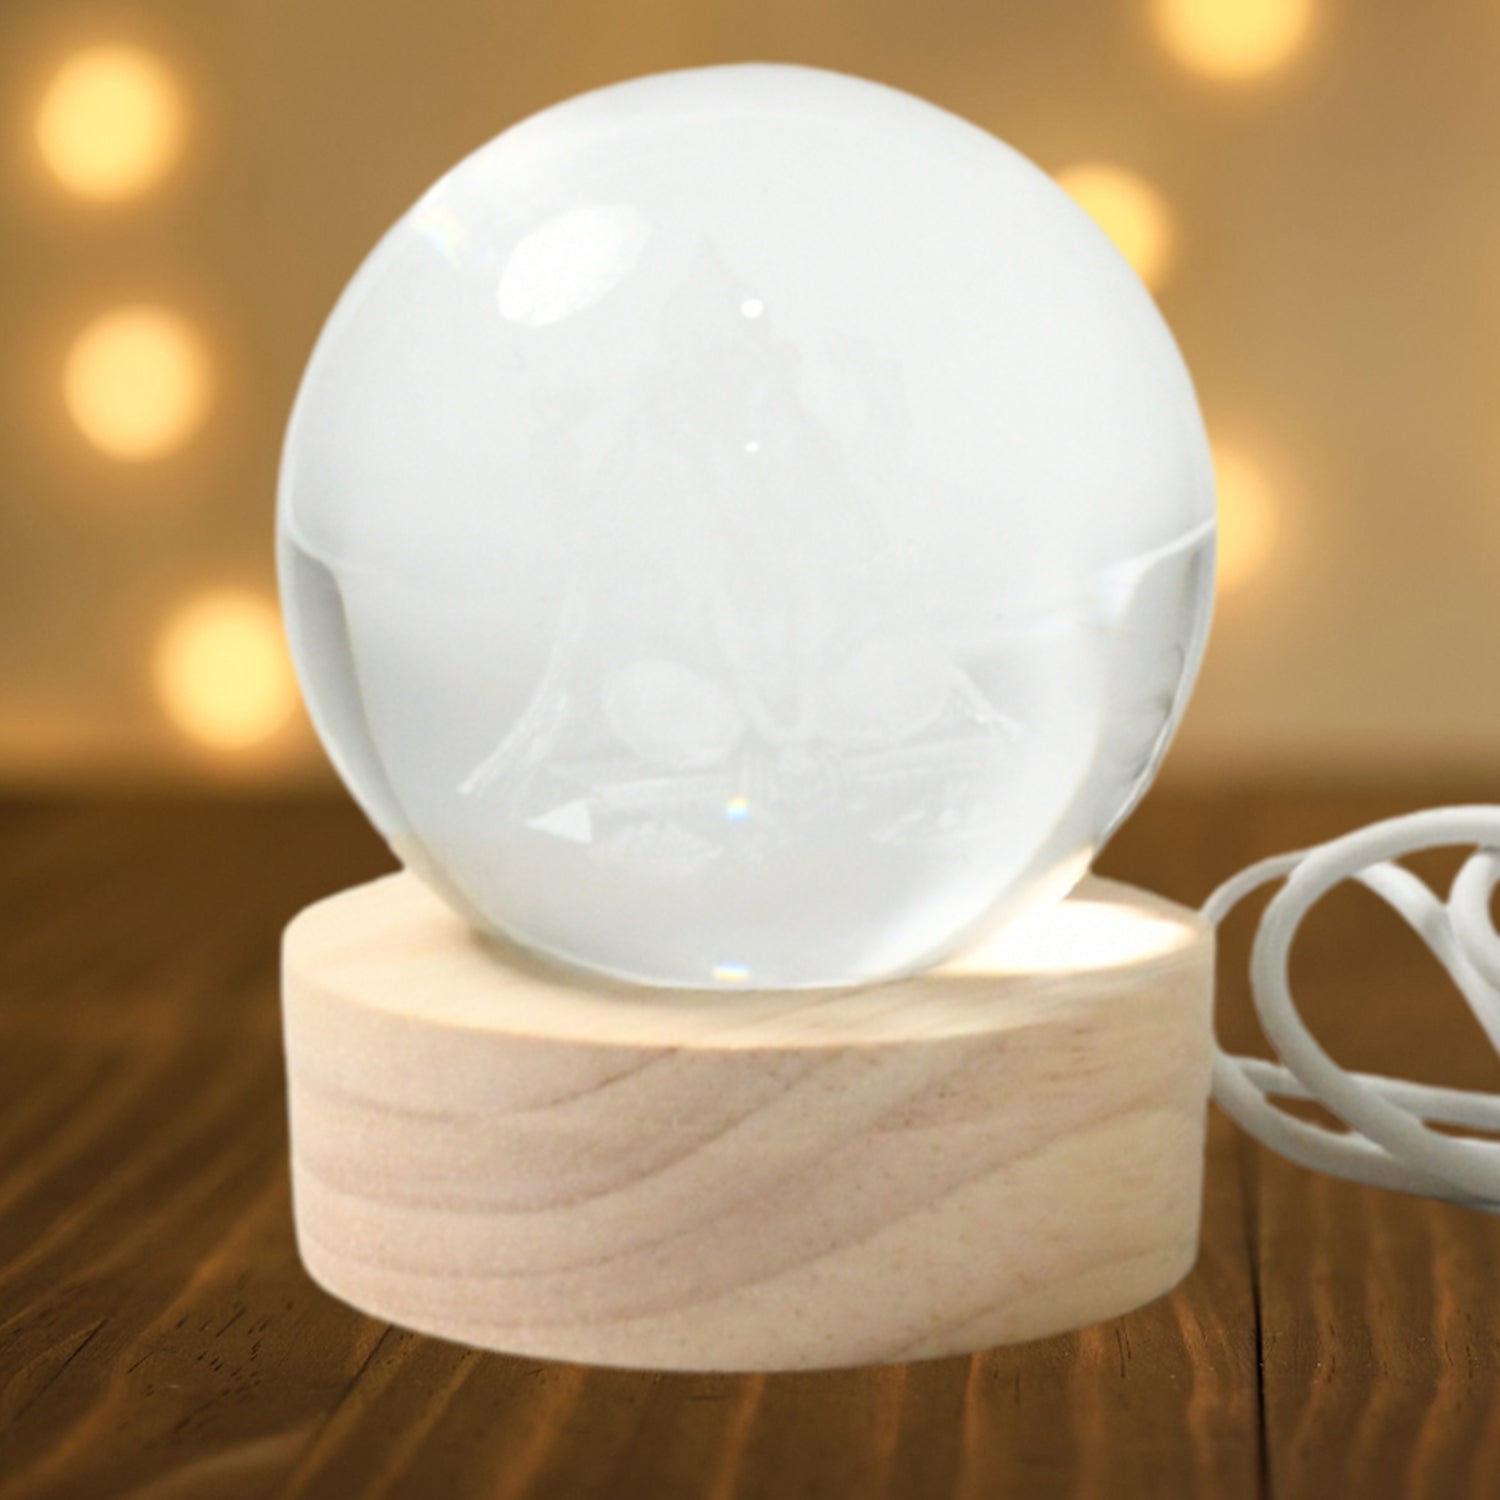 3D Crystal Ball lamps for Bedroom 3D Lamps for Home Decoration 3D Crystal Ball Night Light Gifts for Women Gifts for Men Room Decor Items for Bedroom for Friend and Family (1 Pc)